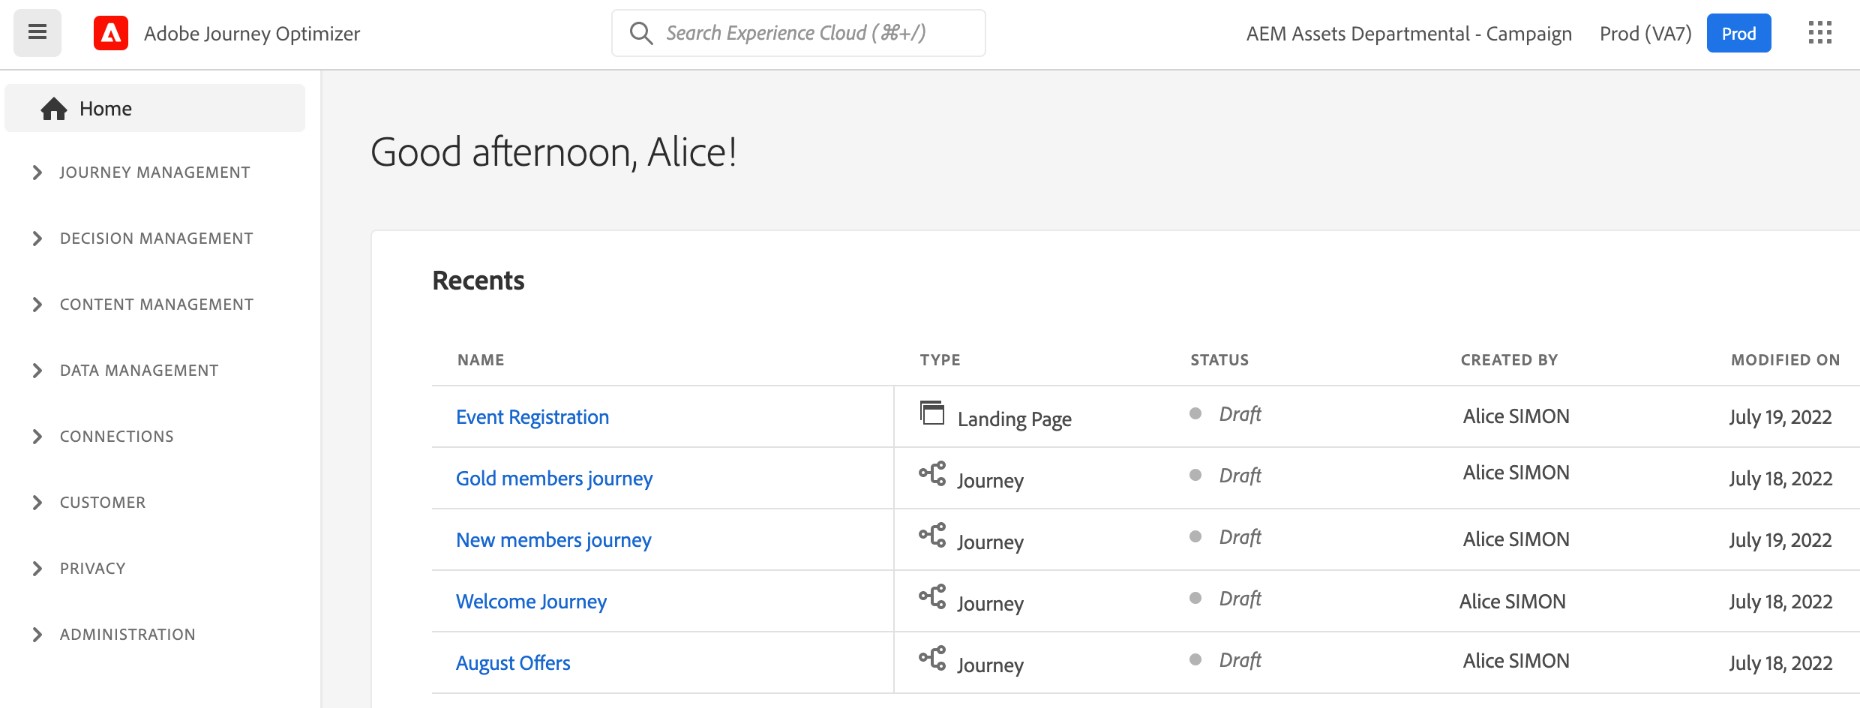 Adobe Journey Optimizer interface: Home and Recents